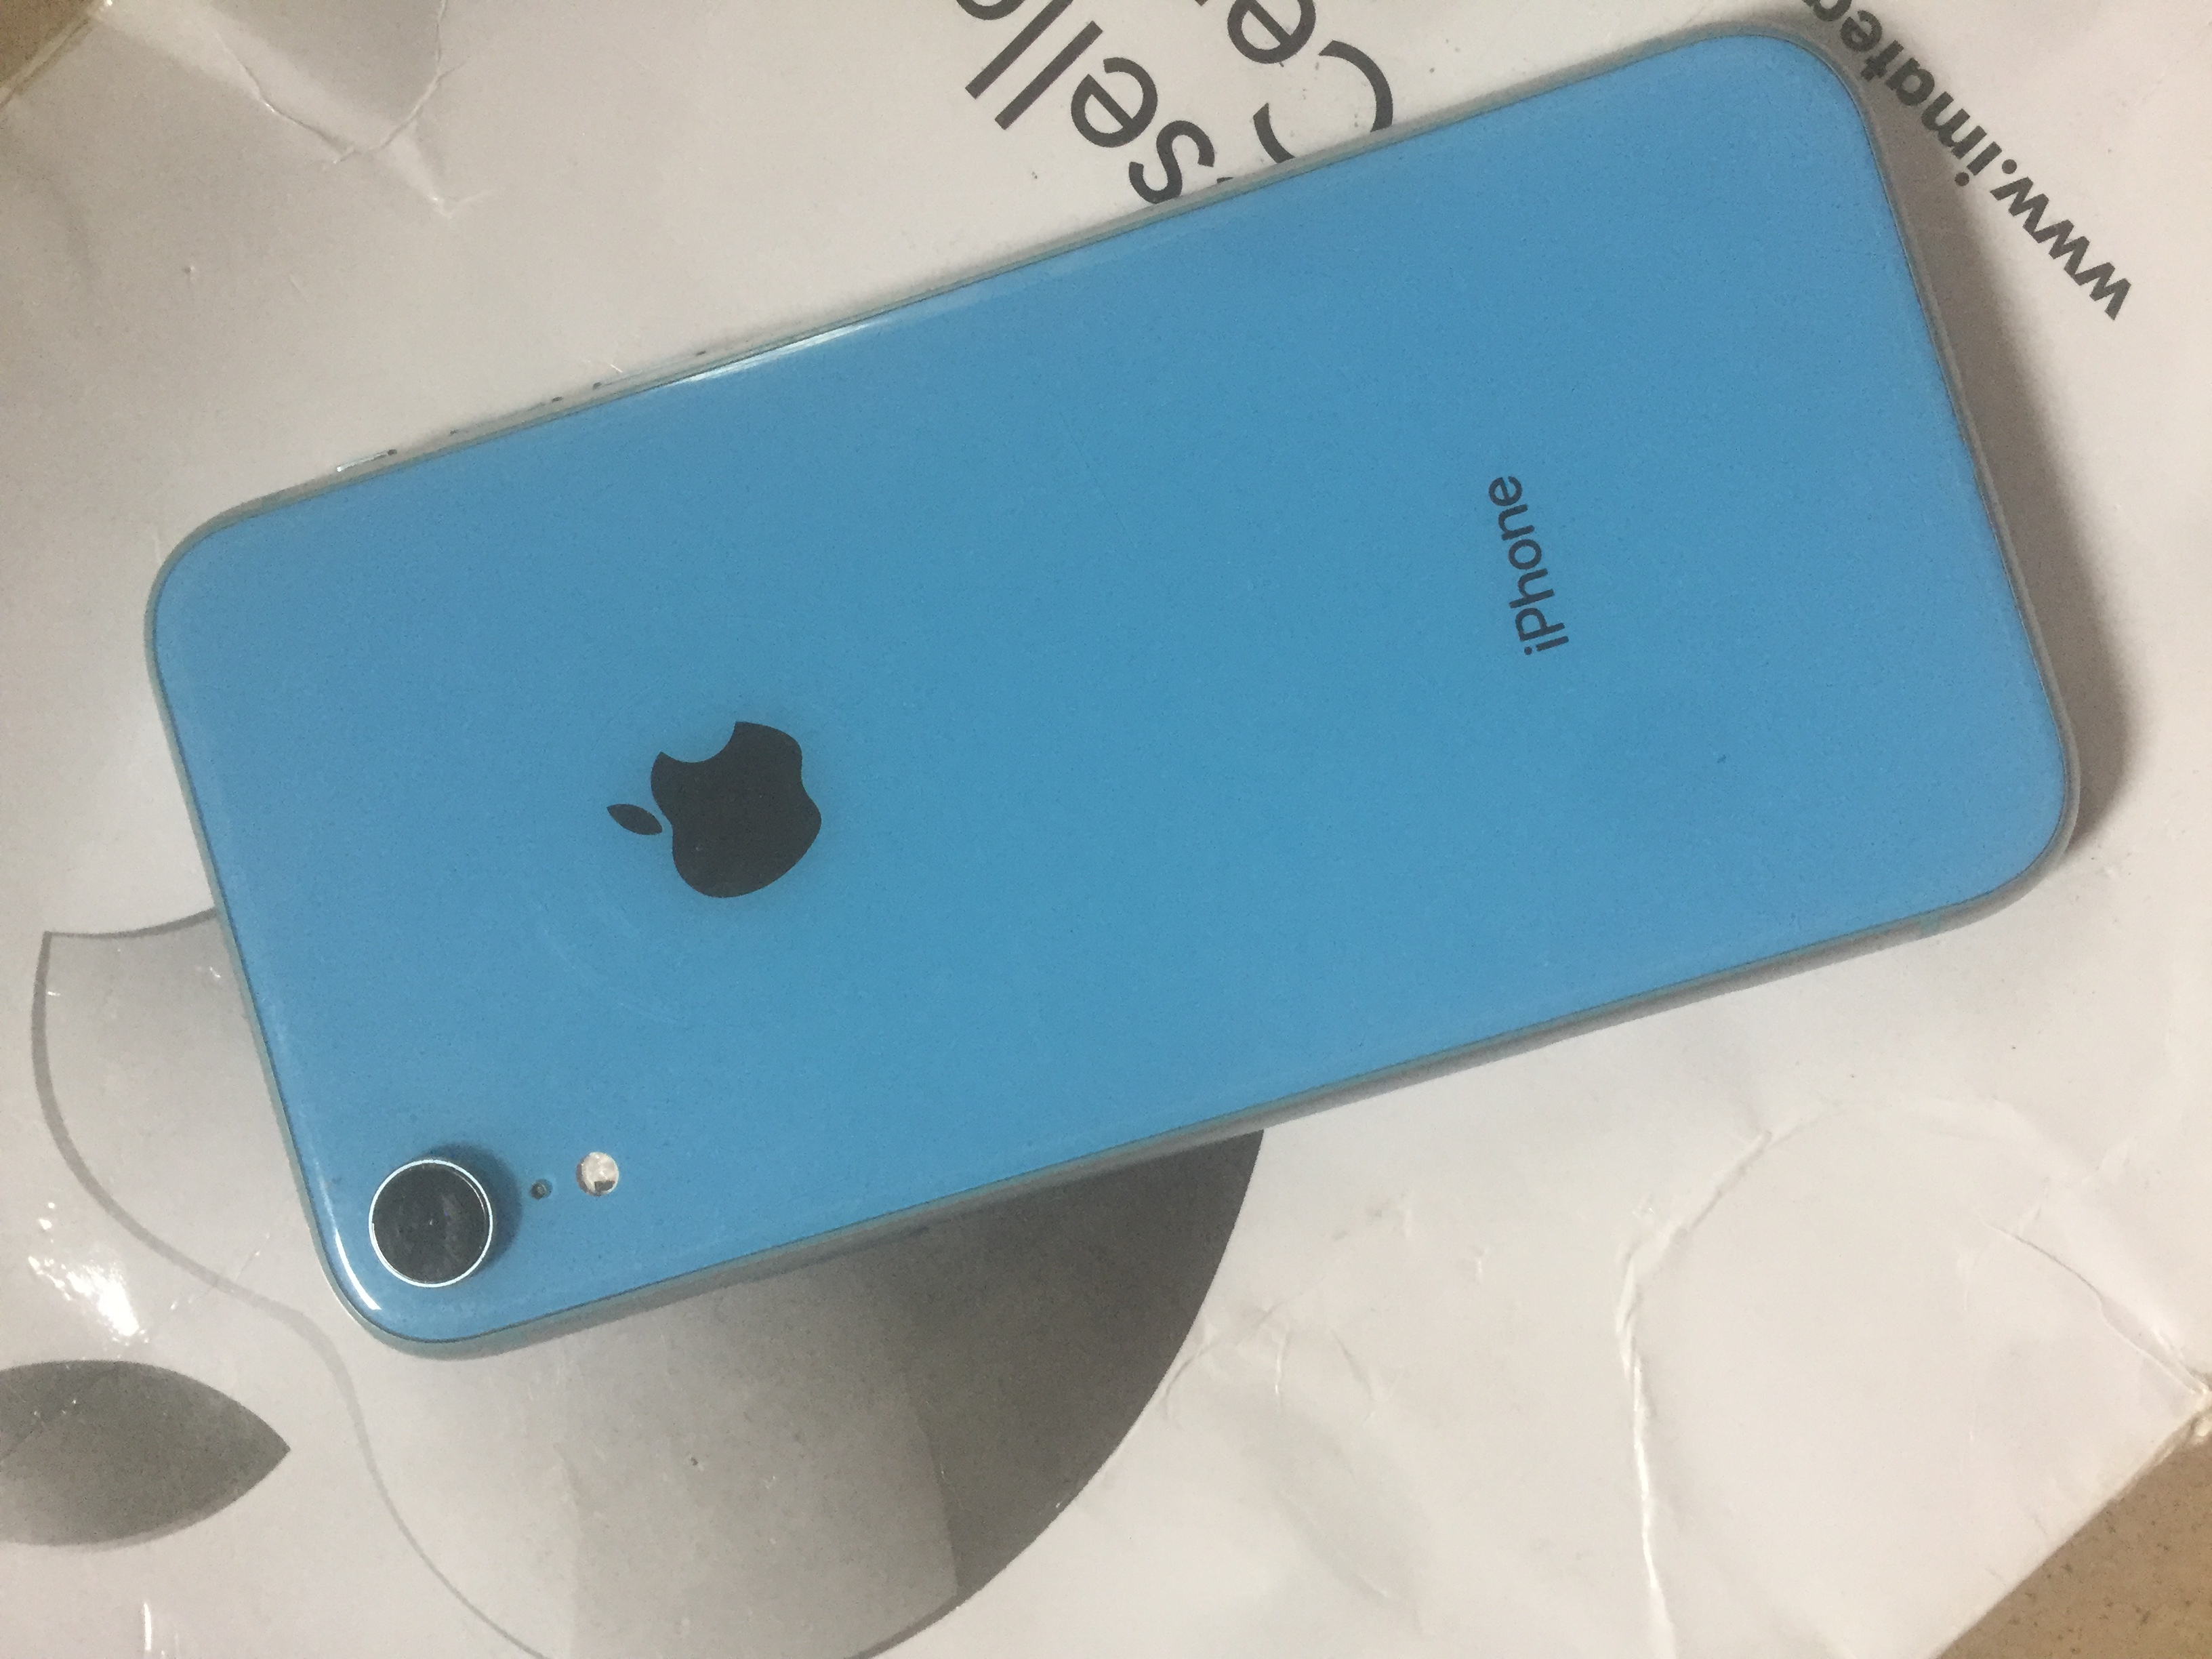 Iphone Xr is available at Efritin